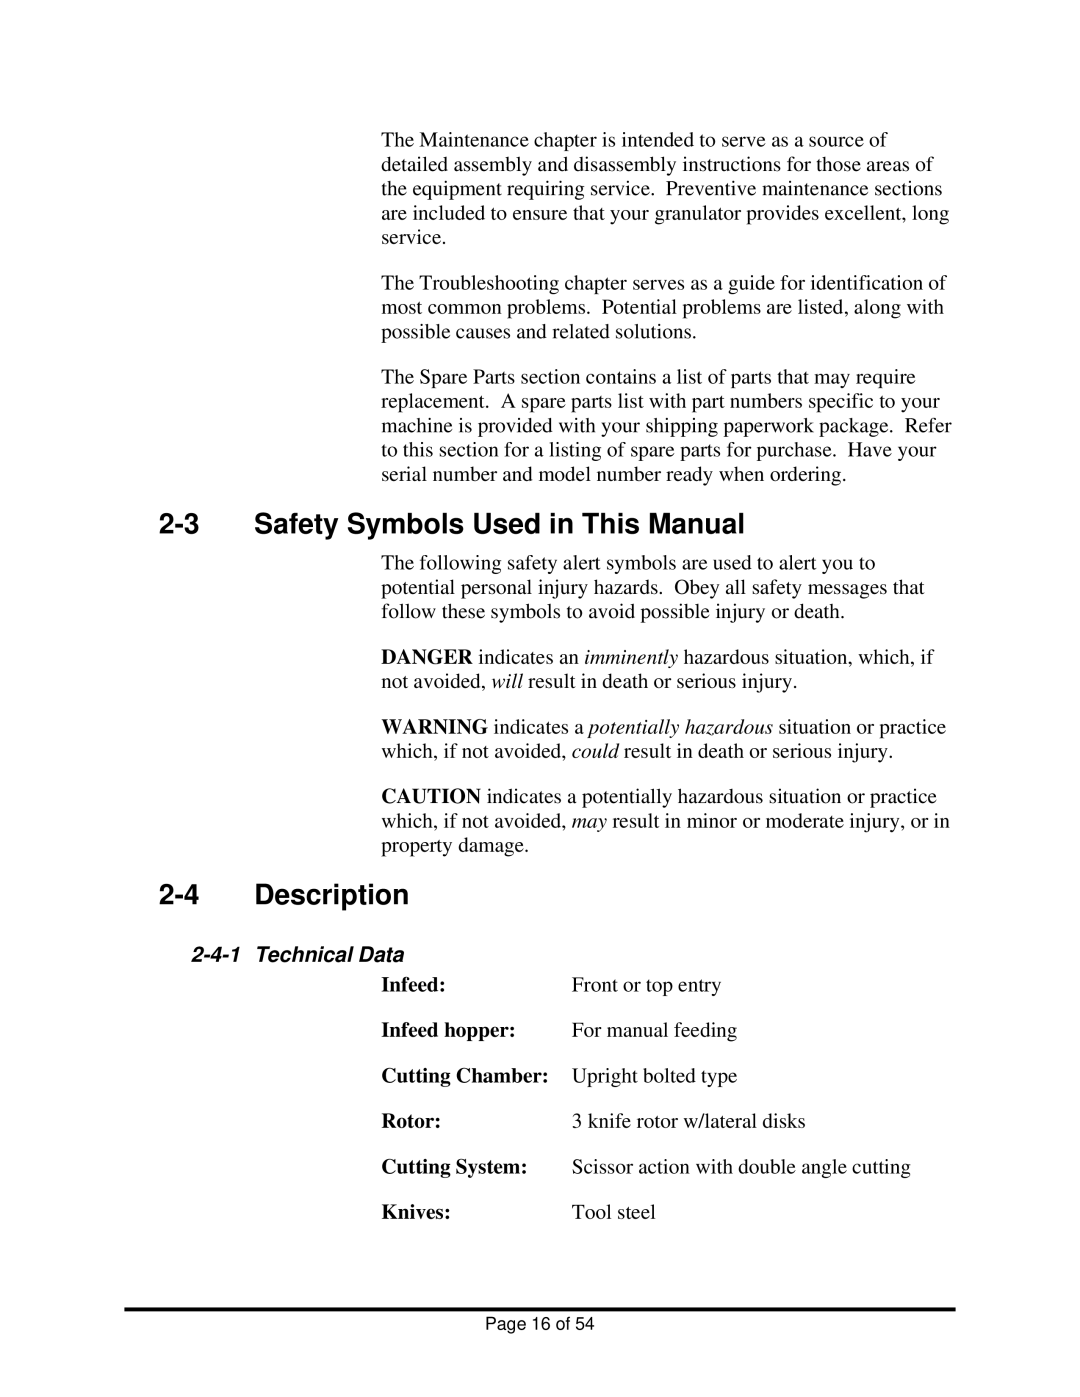 Sterling BP818, BP814, BP810 manual 2-3Safety Symbols Used in This Manual, 2-4Description, 2-4-1Technical Data 